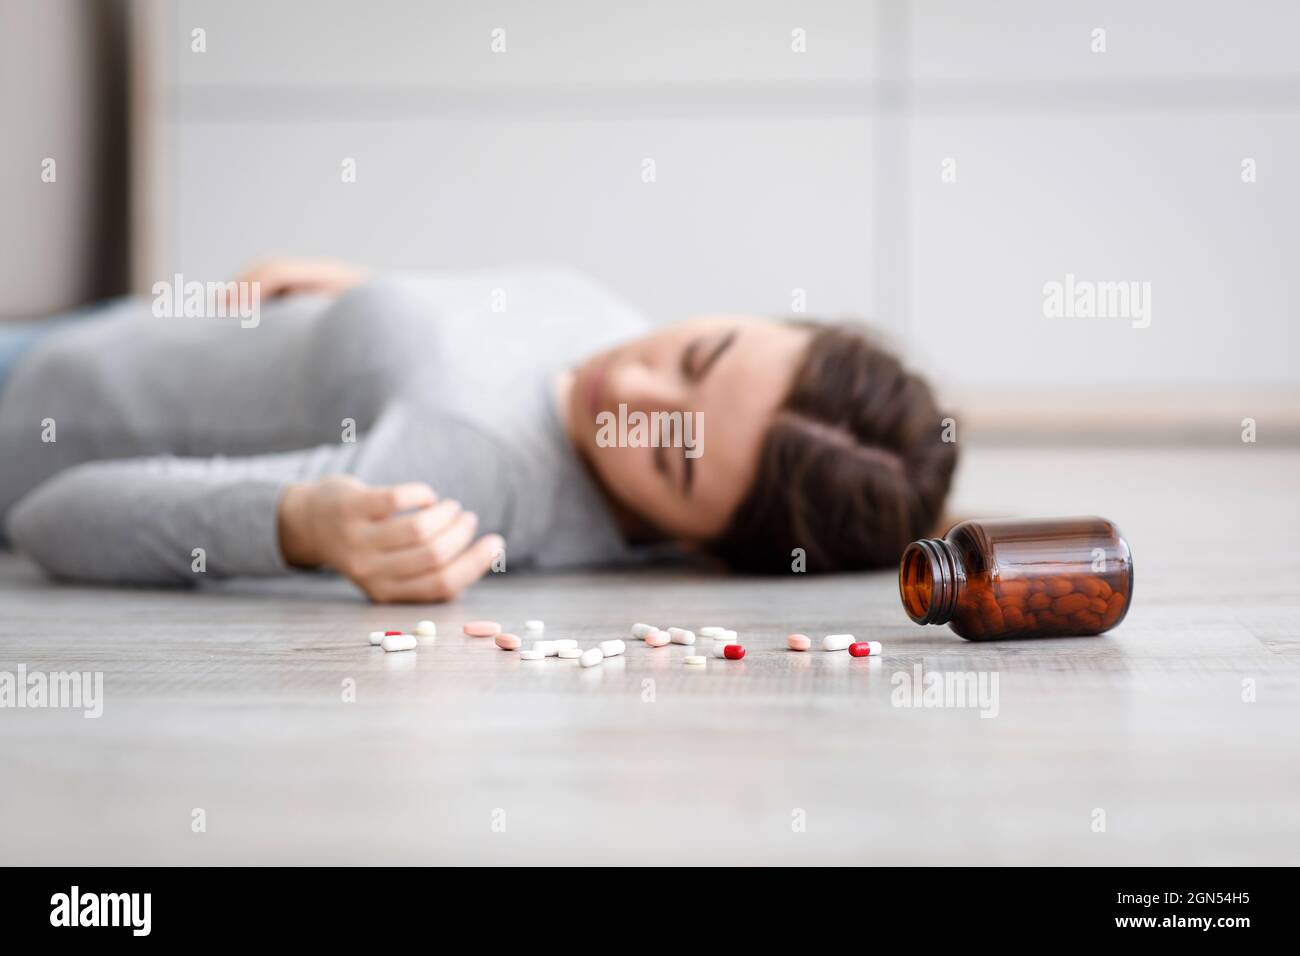 Female with pile of antidepressants kill herself, commit suicide, suffer from mental distress Stock Photo